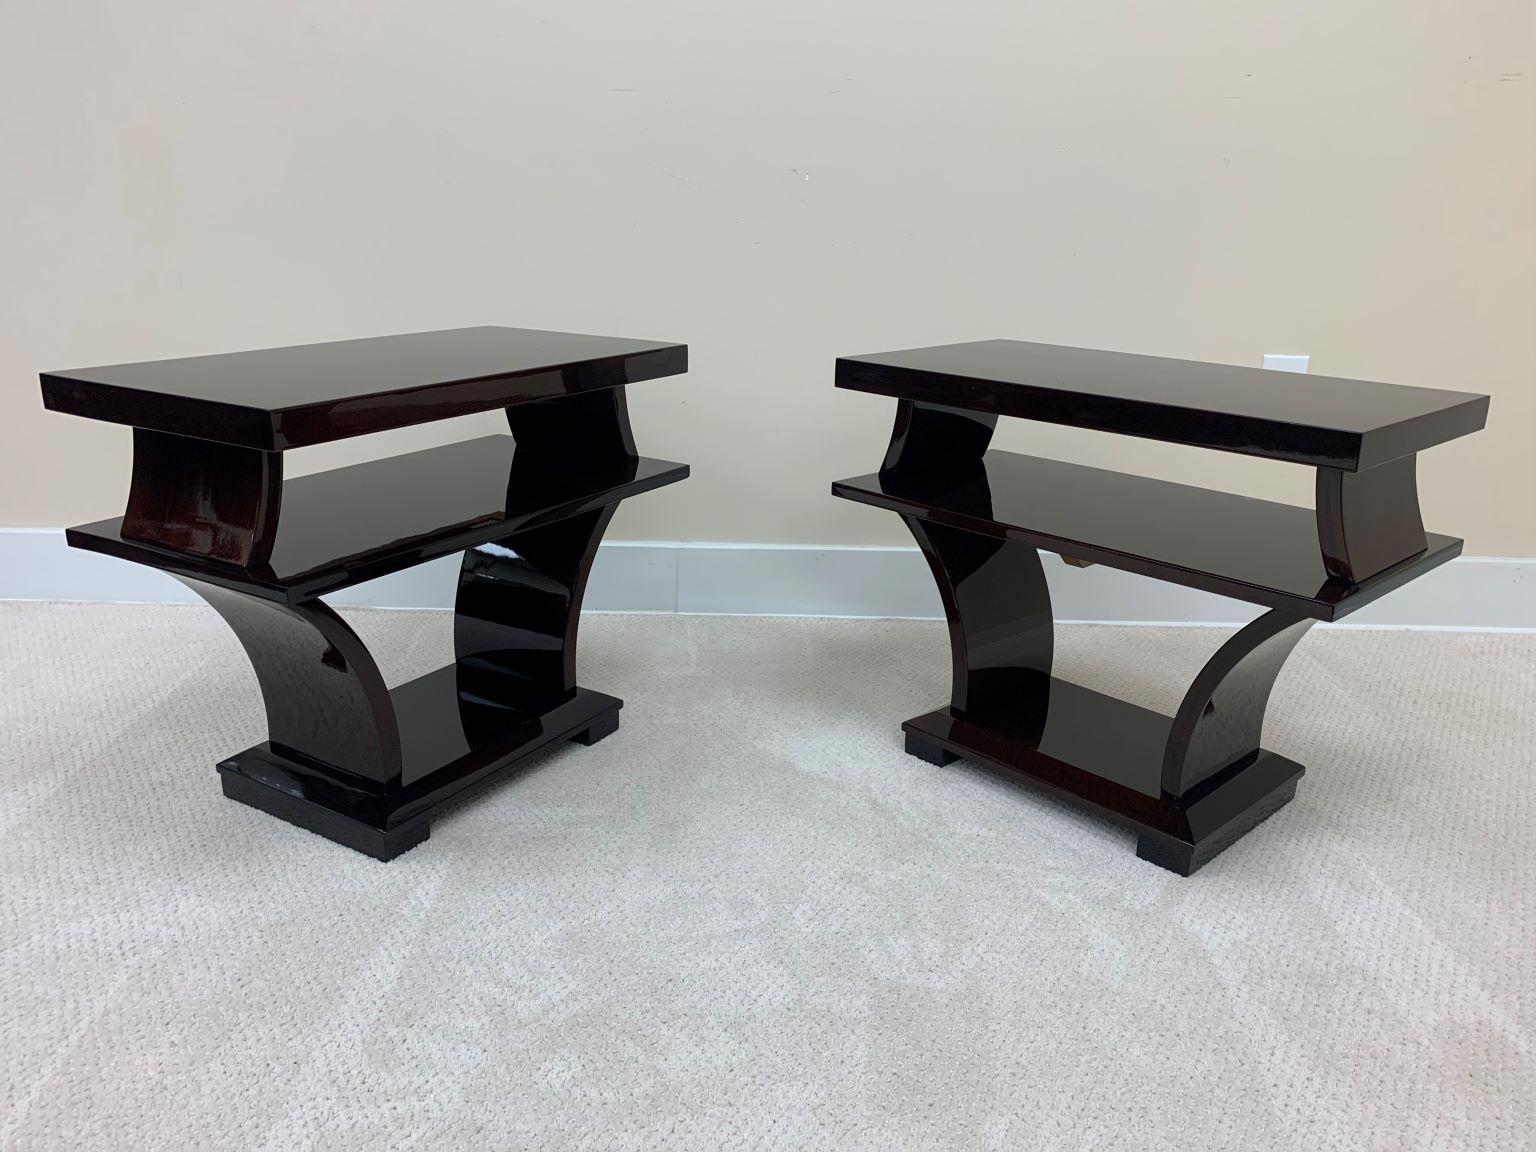 Pair of Art Deco Side Tables, Streamline American Modern  Circa 1940’s In Excellent Condition For Sale In Bernville, PA